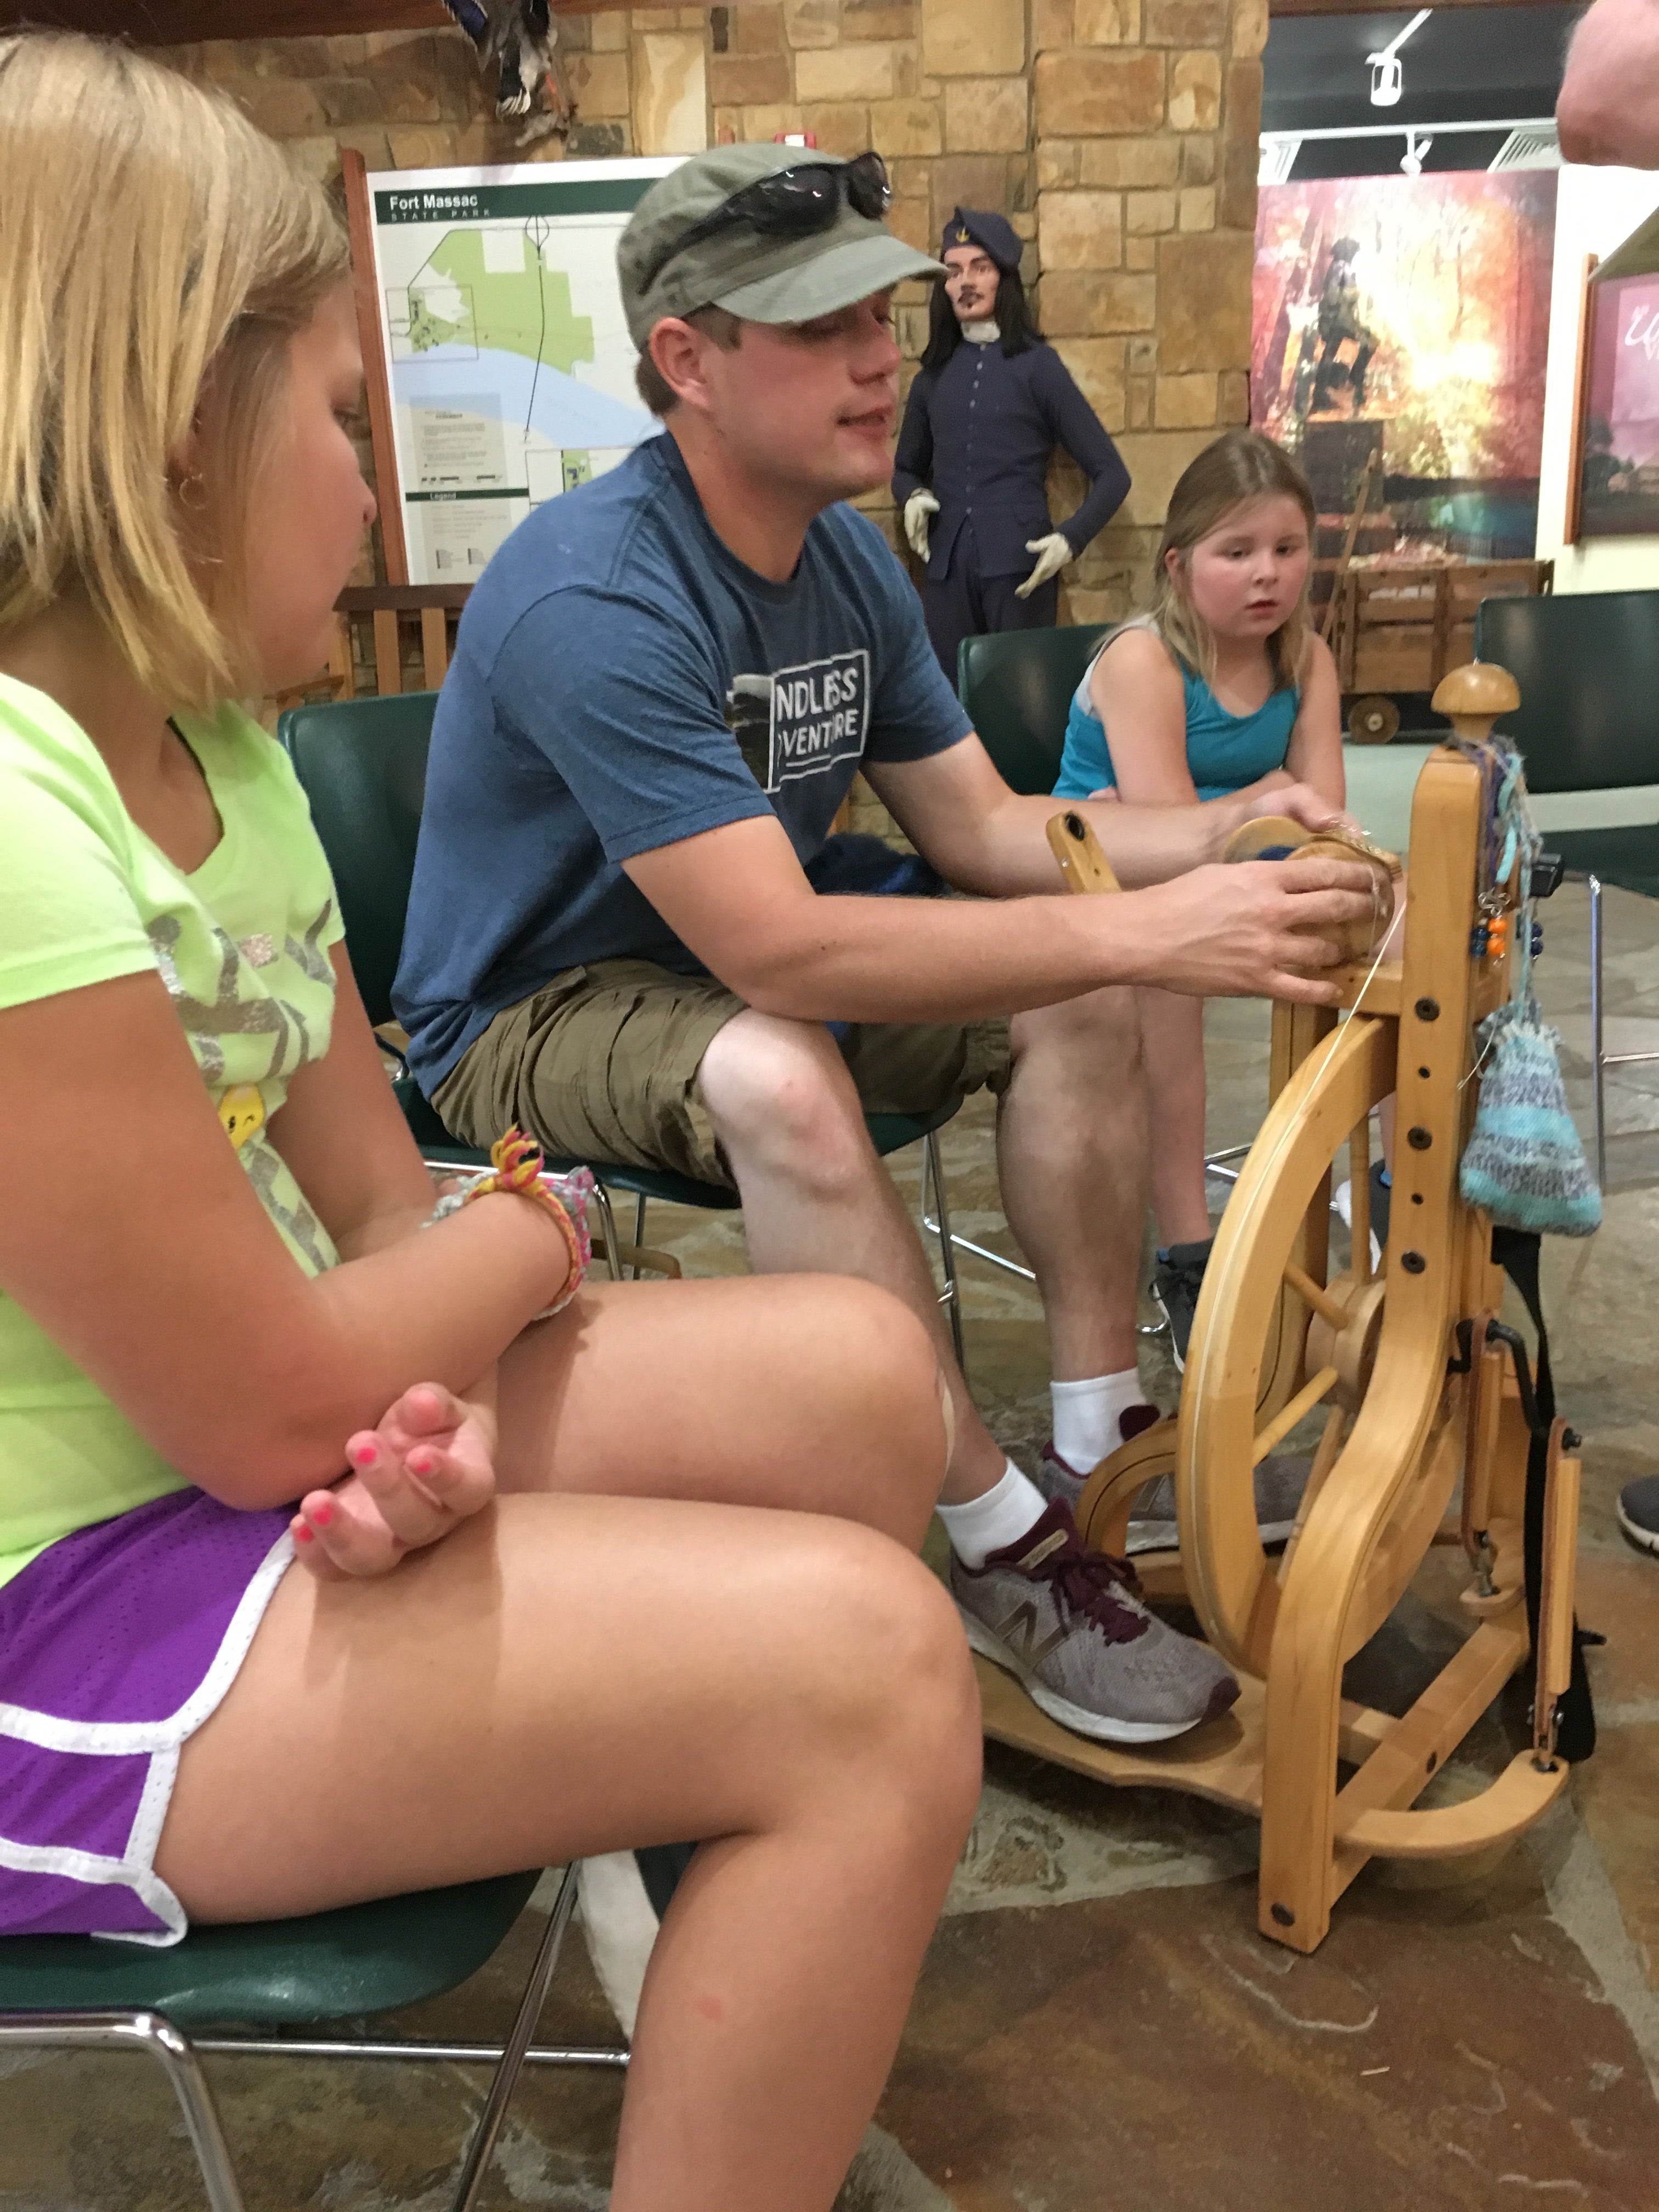 Spinning demo at the visitor center.